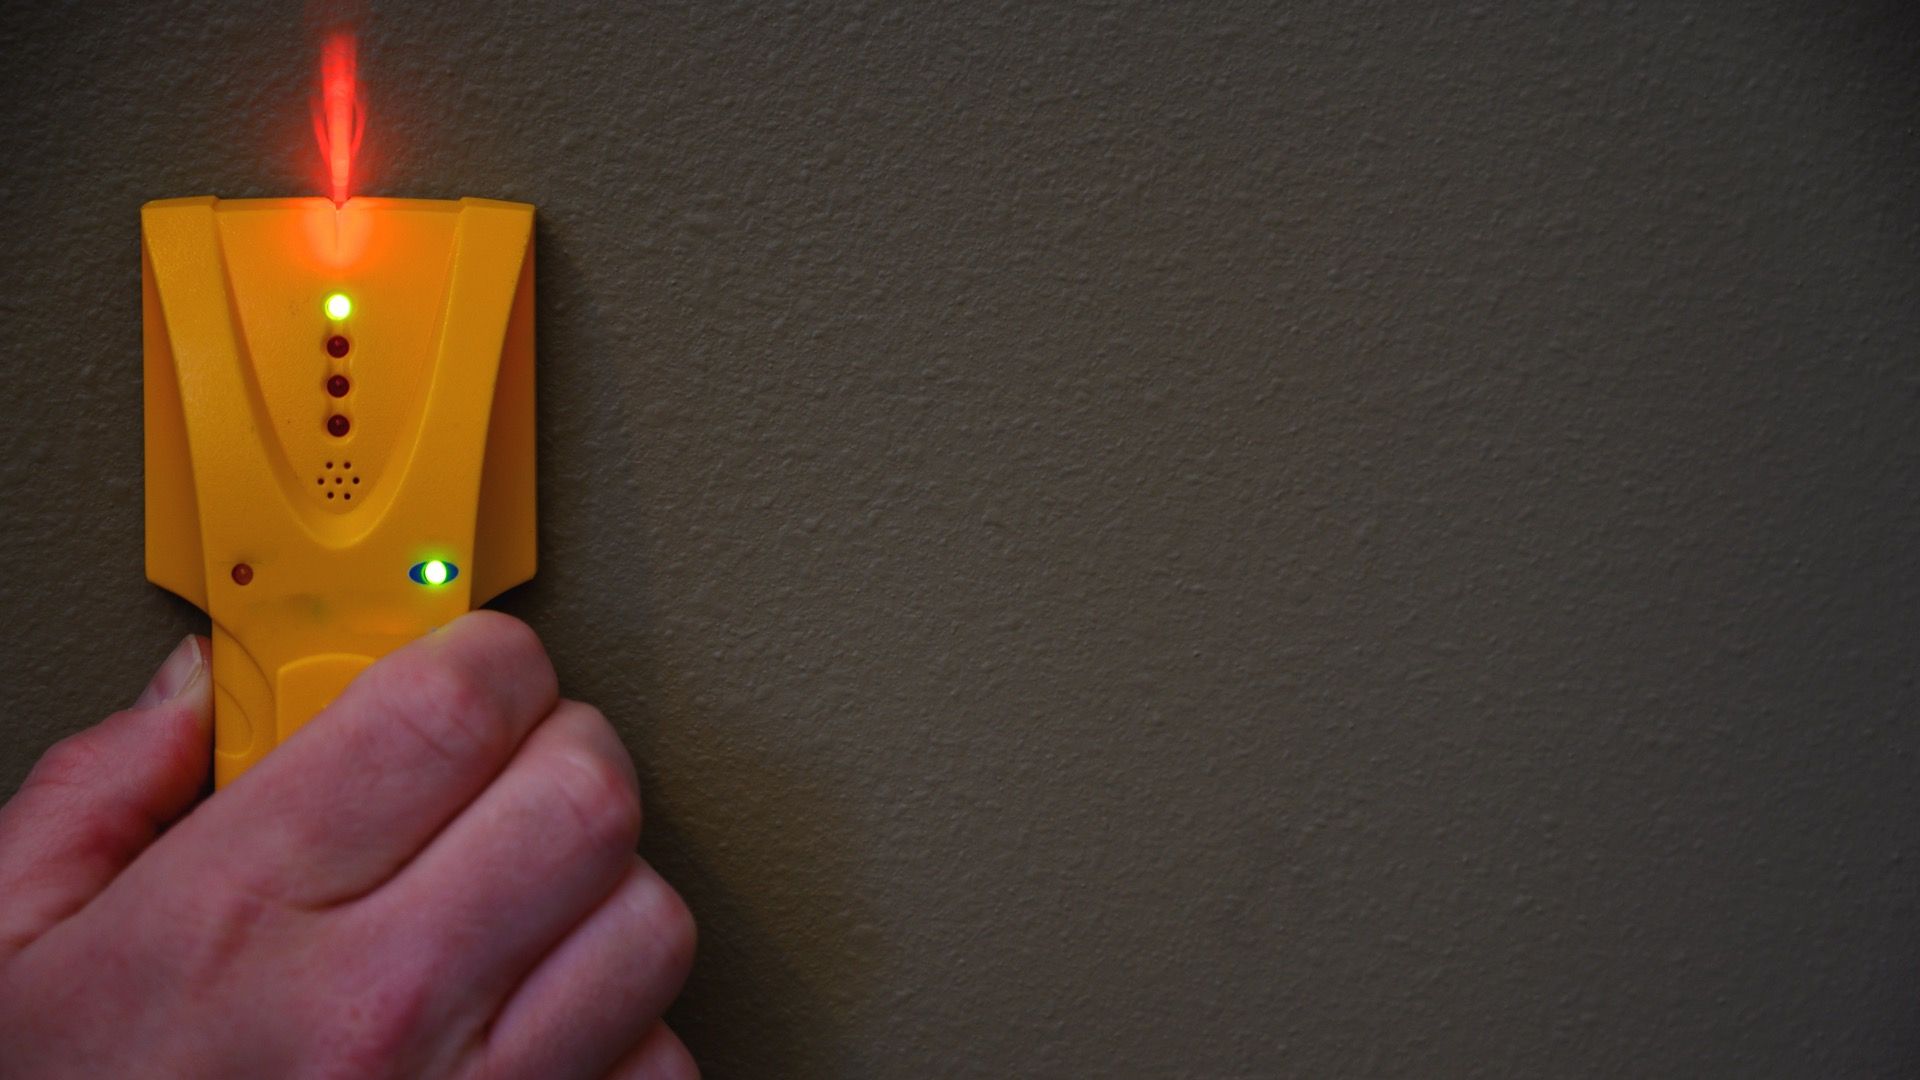 cheap stud finder on a wall